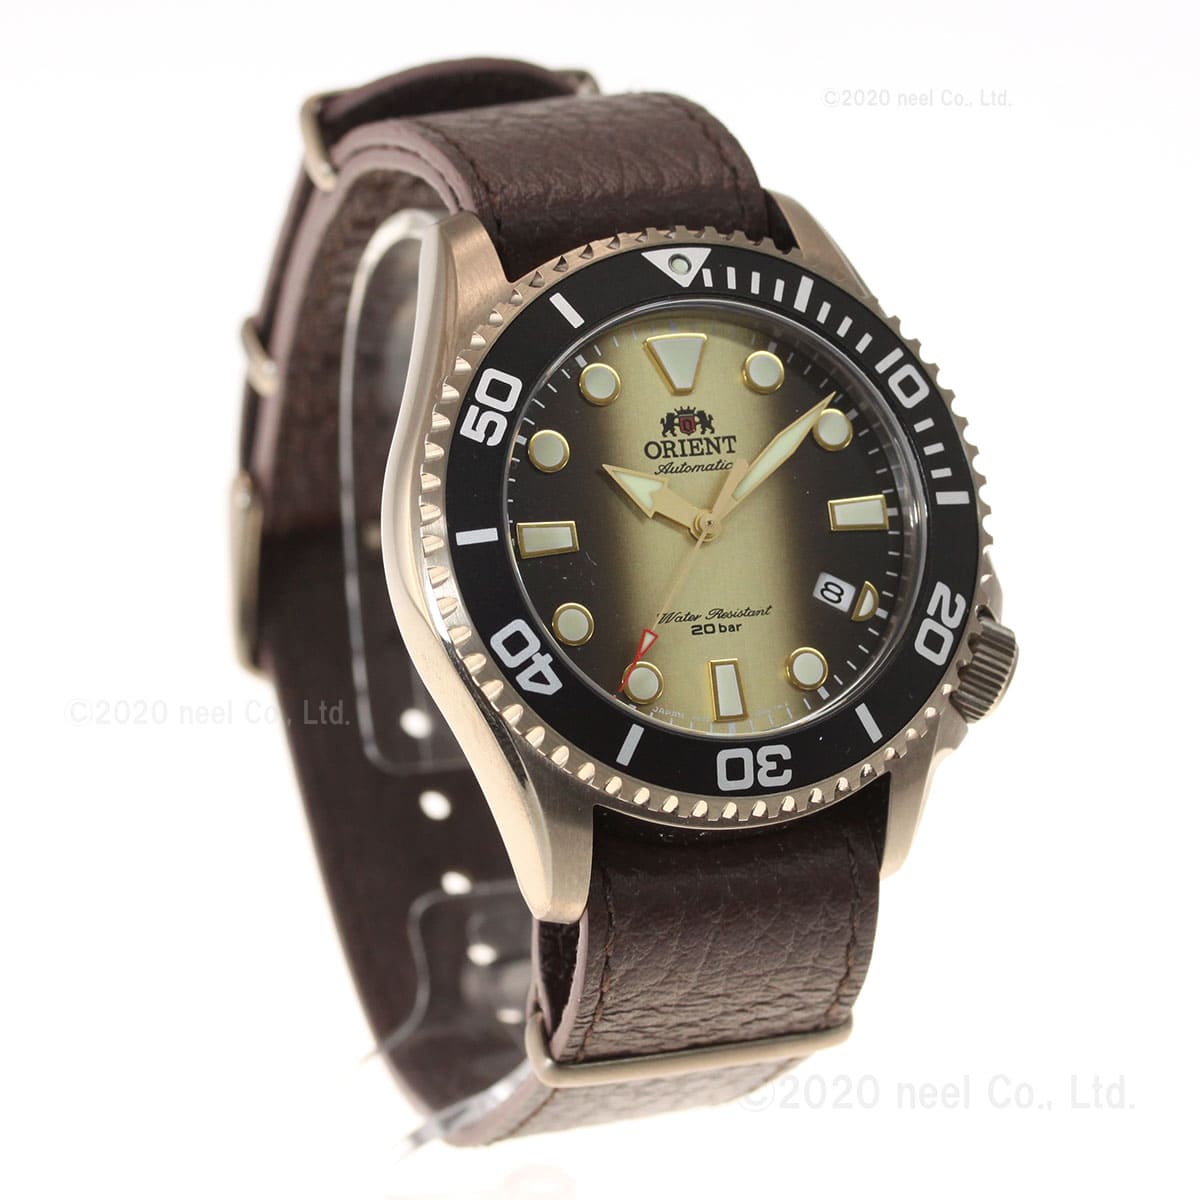 New]in the shop model jaguar Focus diver ORIENT Sports Jaguar Forcus  RN-AC0K05G 2020 new work of the 70th anniversary of the orient mens  Automatic winding machine type - BE FORWARD Store